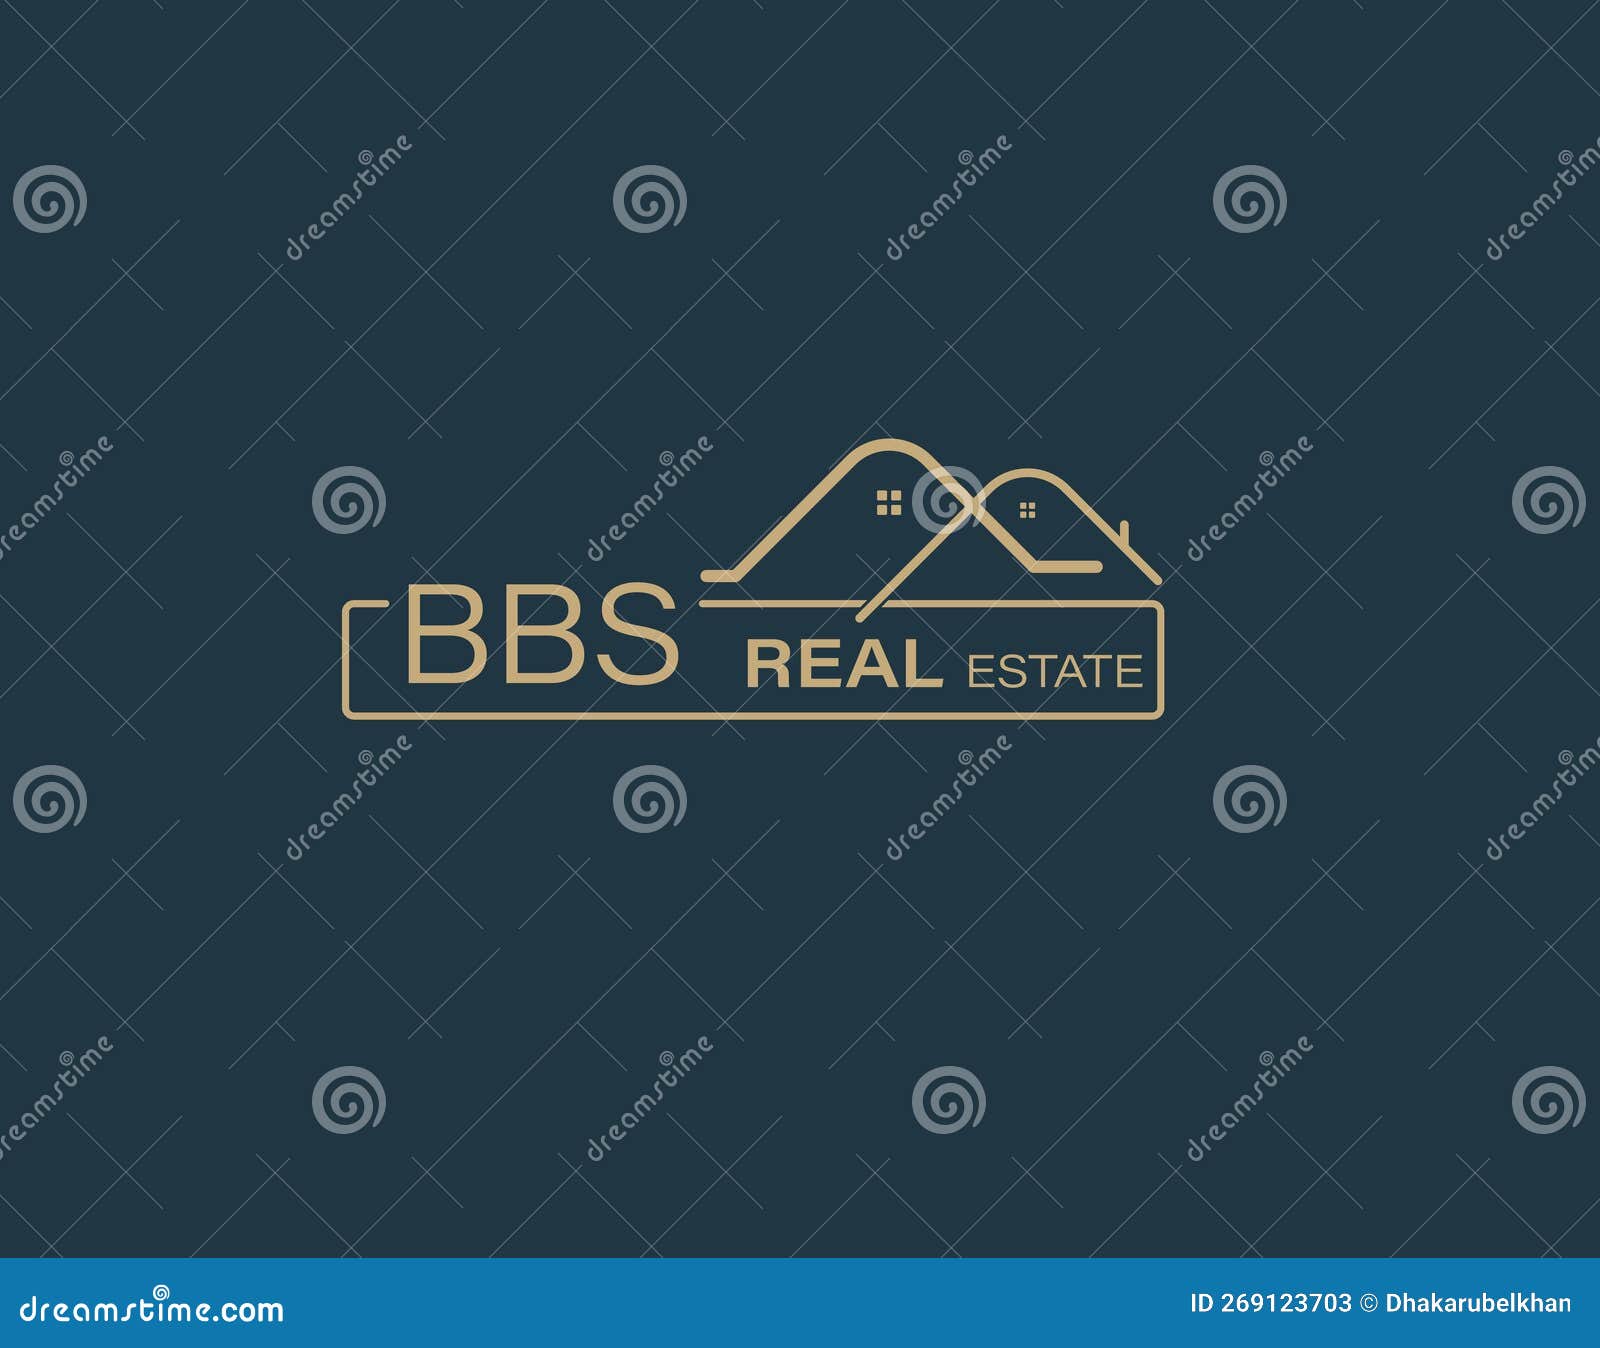 bbs real estate and consultants logo  s images. luxury real estate logo 